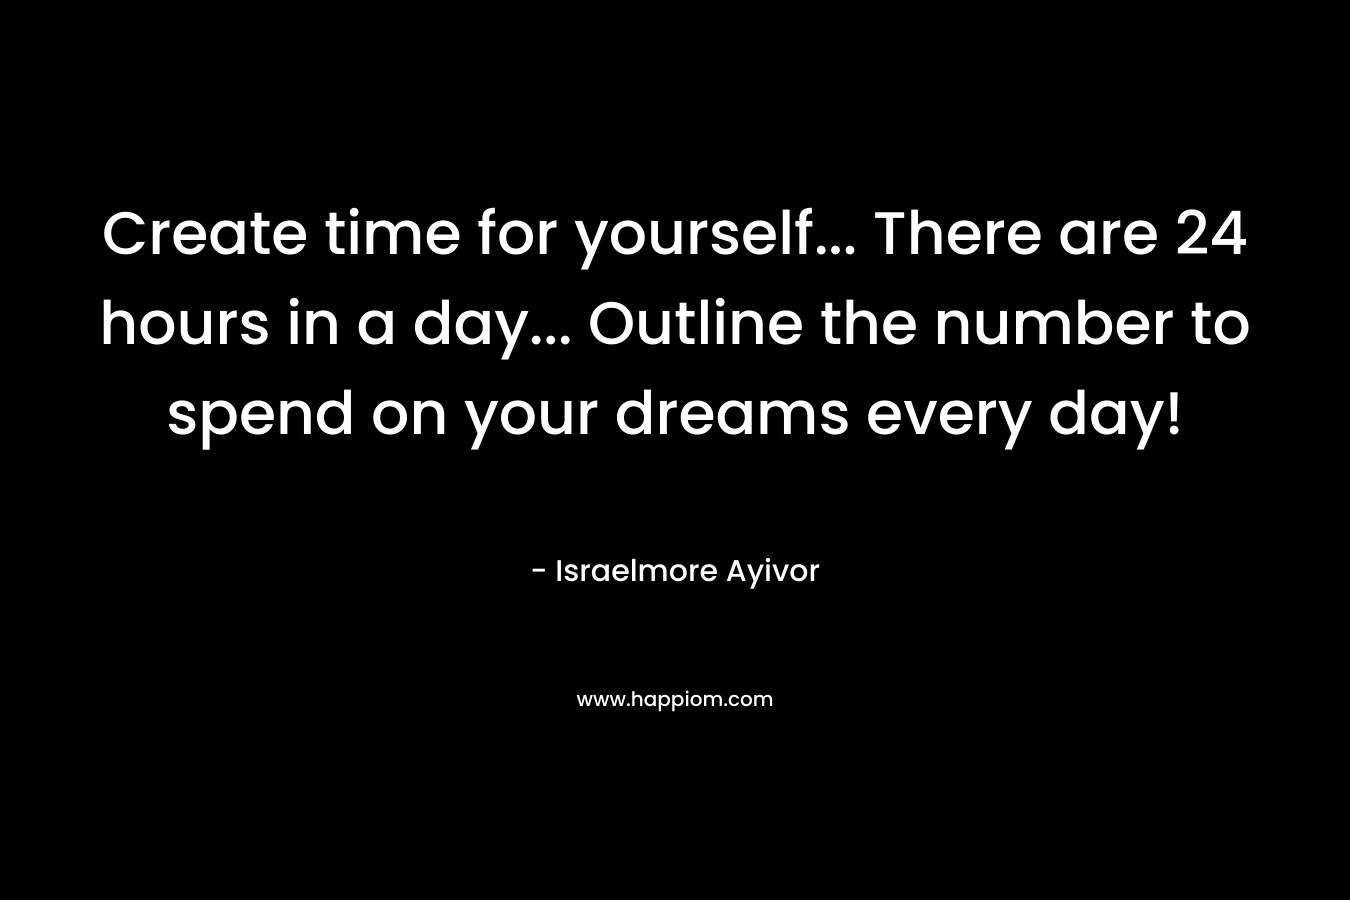 Create time for yourself... There are 24 hours in a day... Outline the number to spend on your dreams every day!